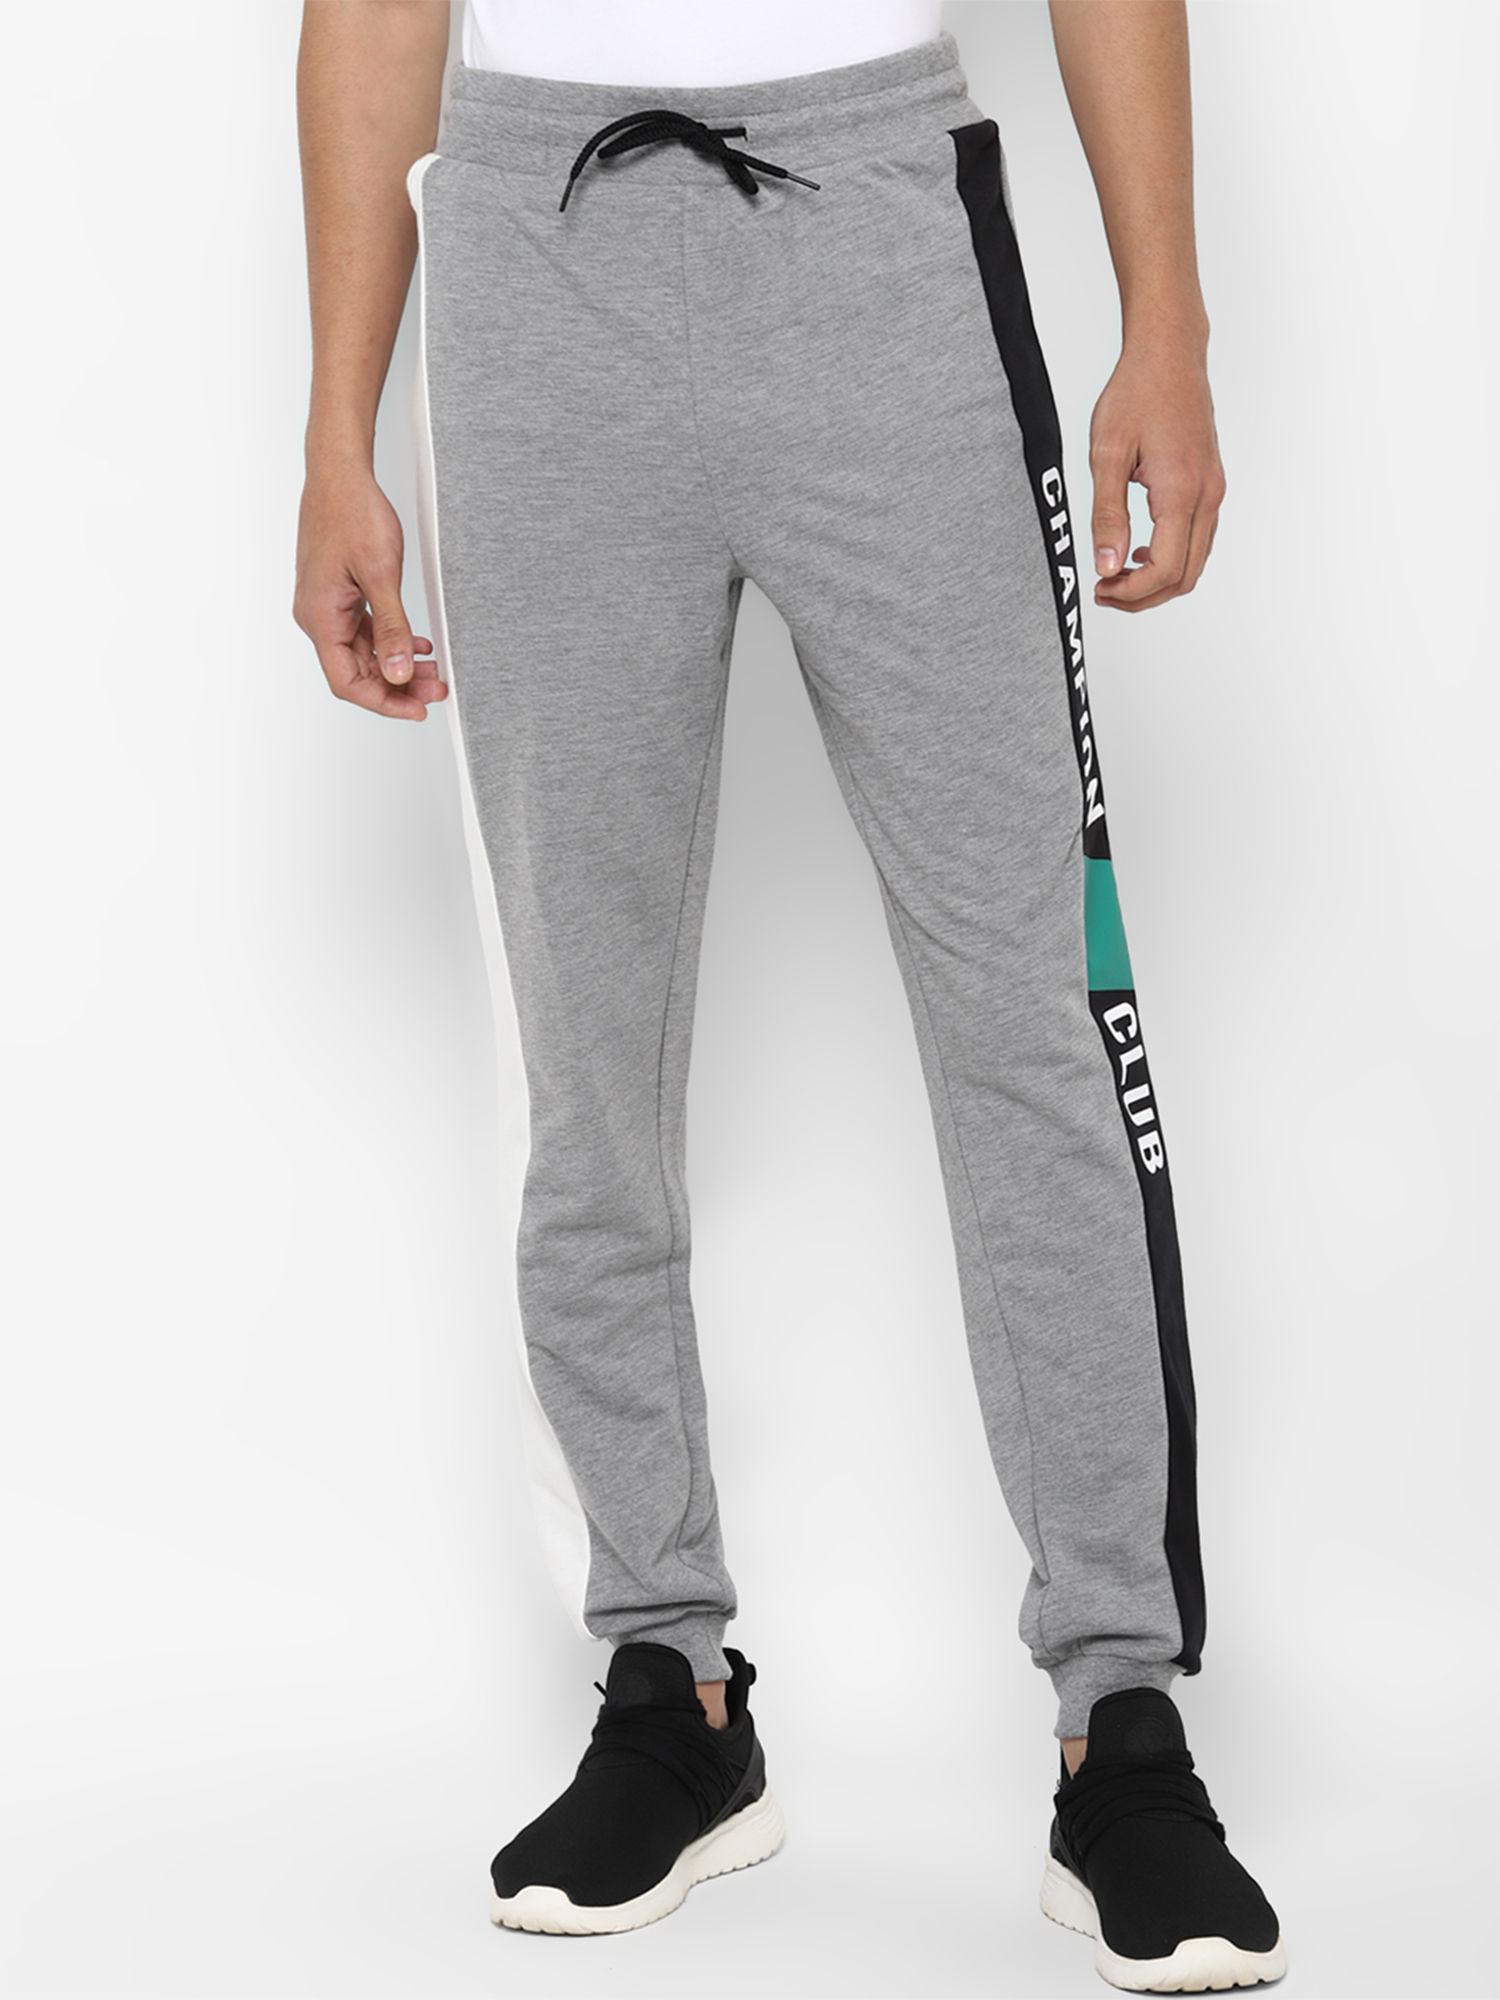 grey-embroidered-side-striped-fleece-sweatpants